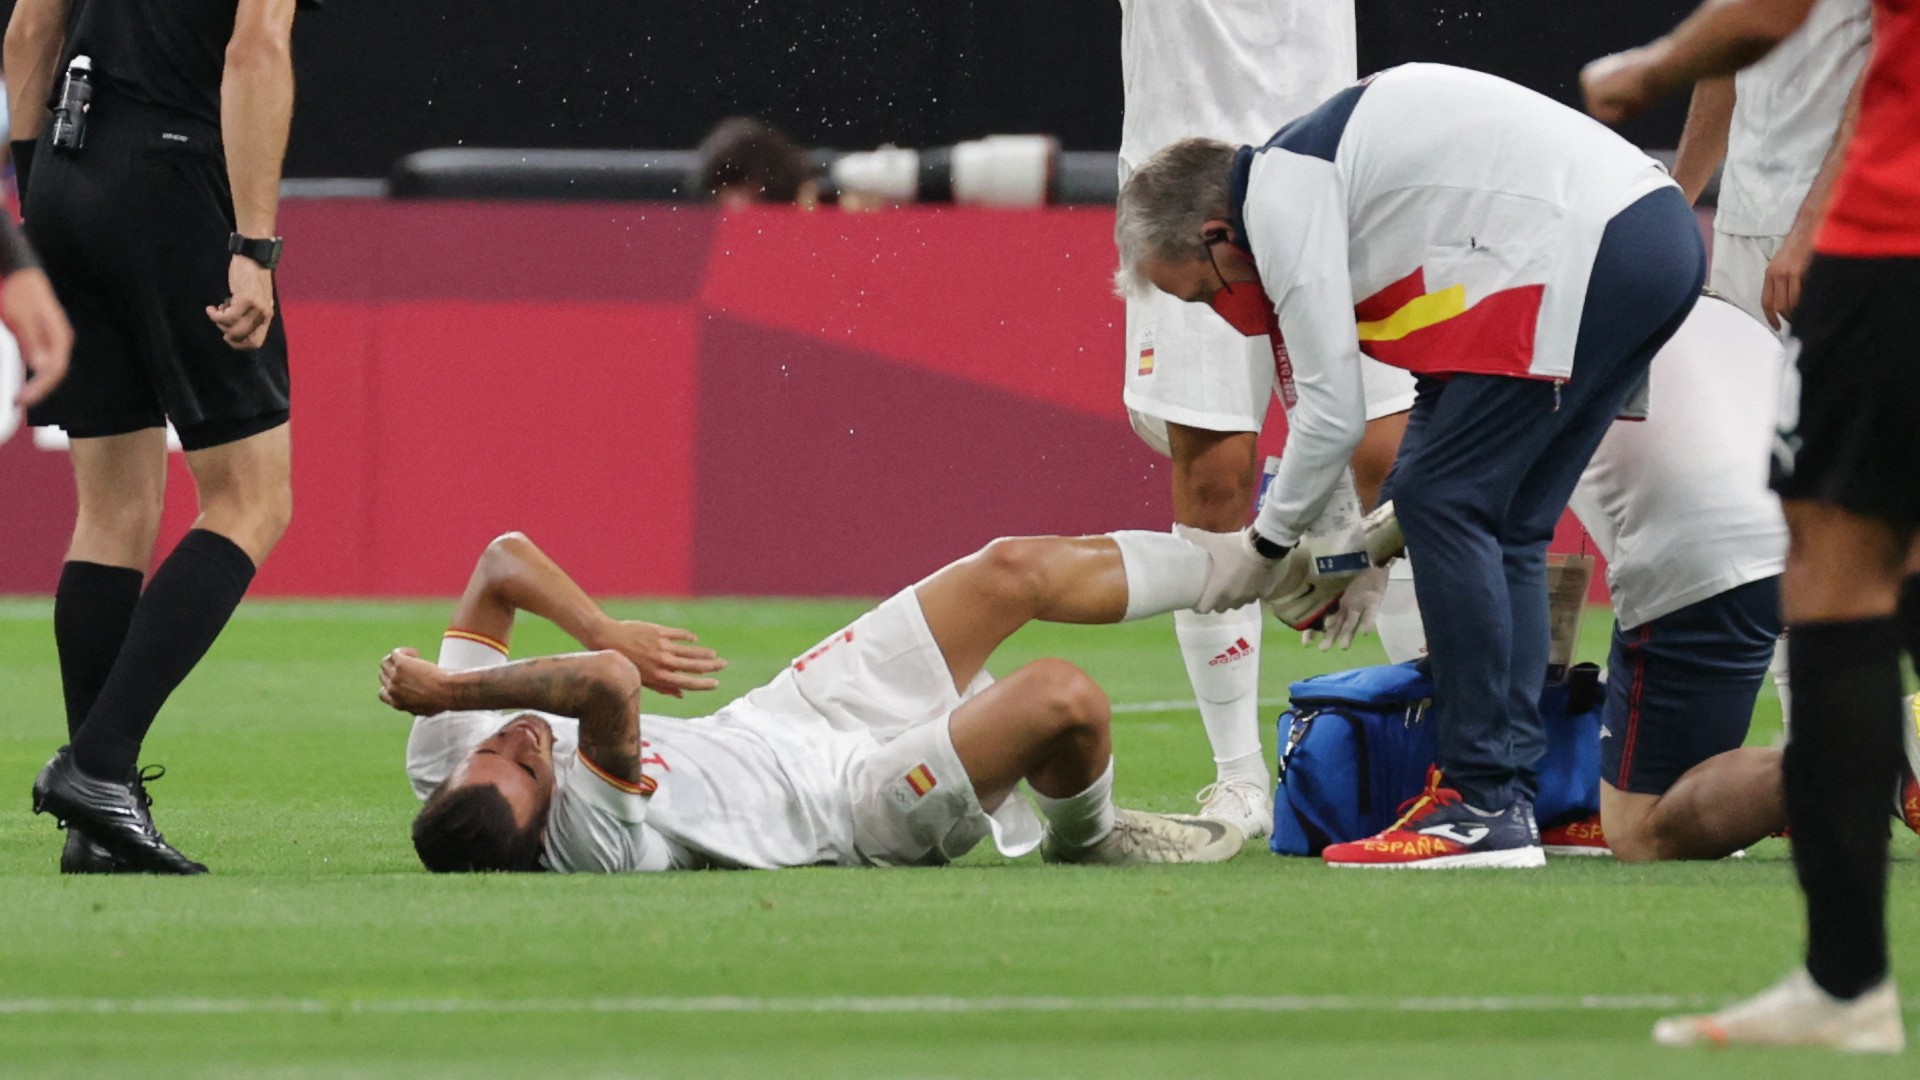 Injury worry for Real Madrid midfielder Ceballos as he limps out of Spain clash with Egypt at Olympics